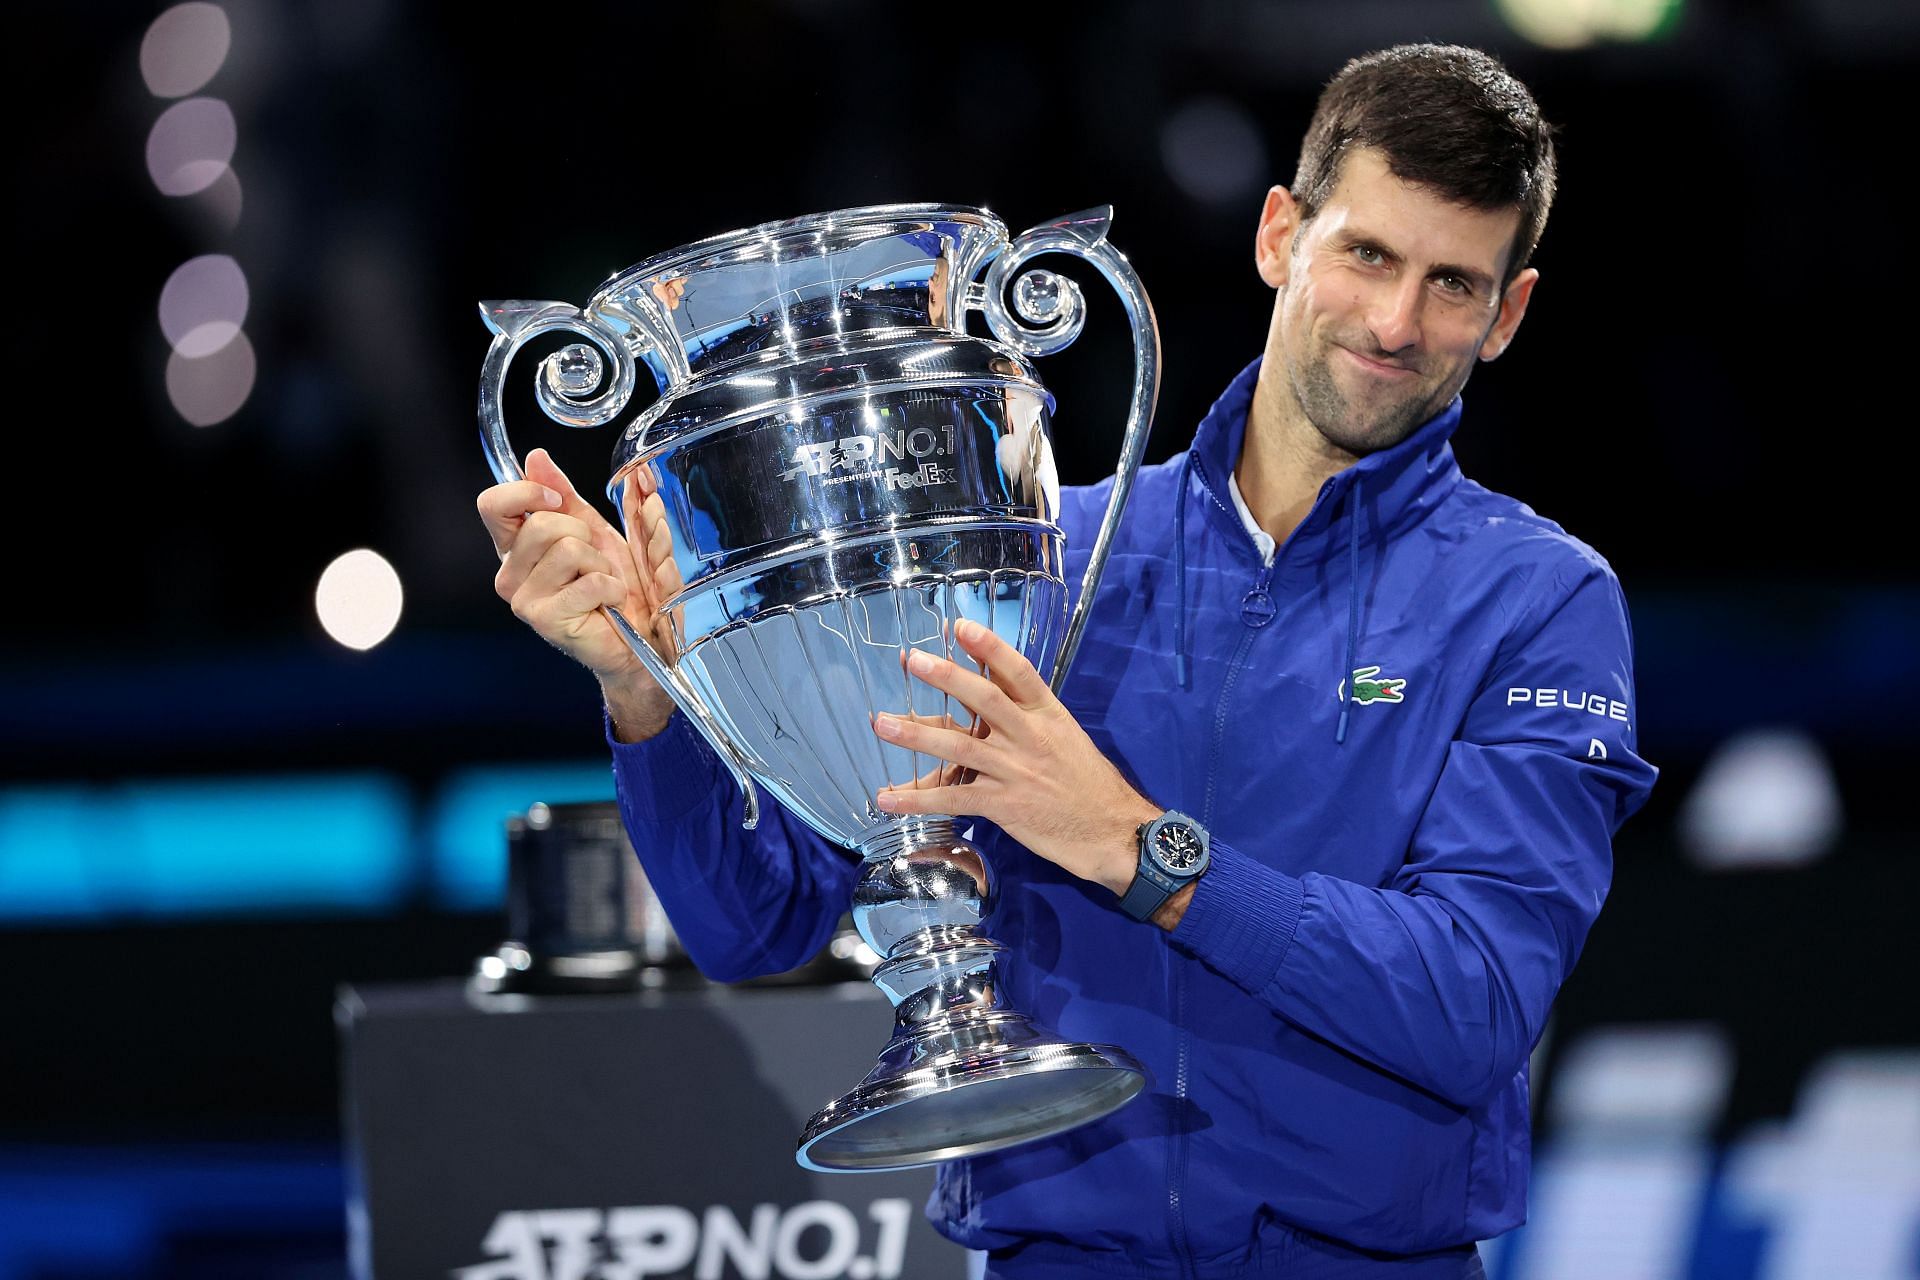 Novak Djokovic with his record seventh year end number one trophy at the 2021 ATP Finals.